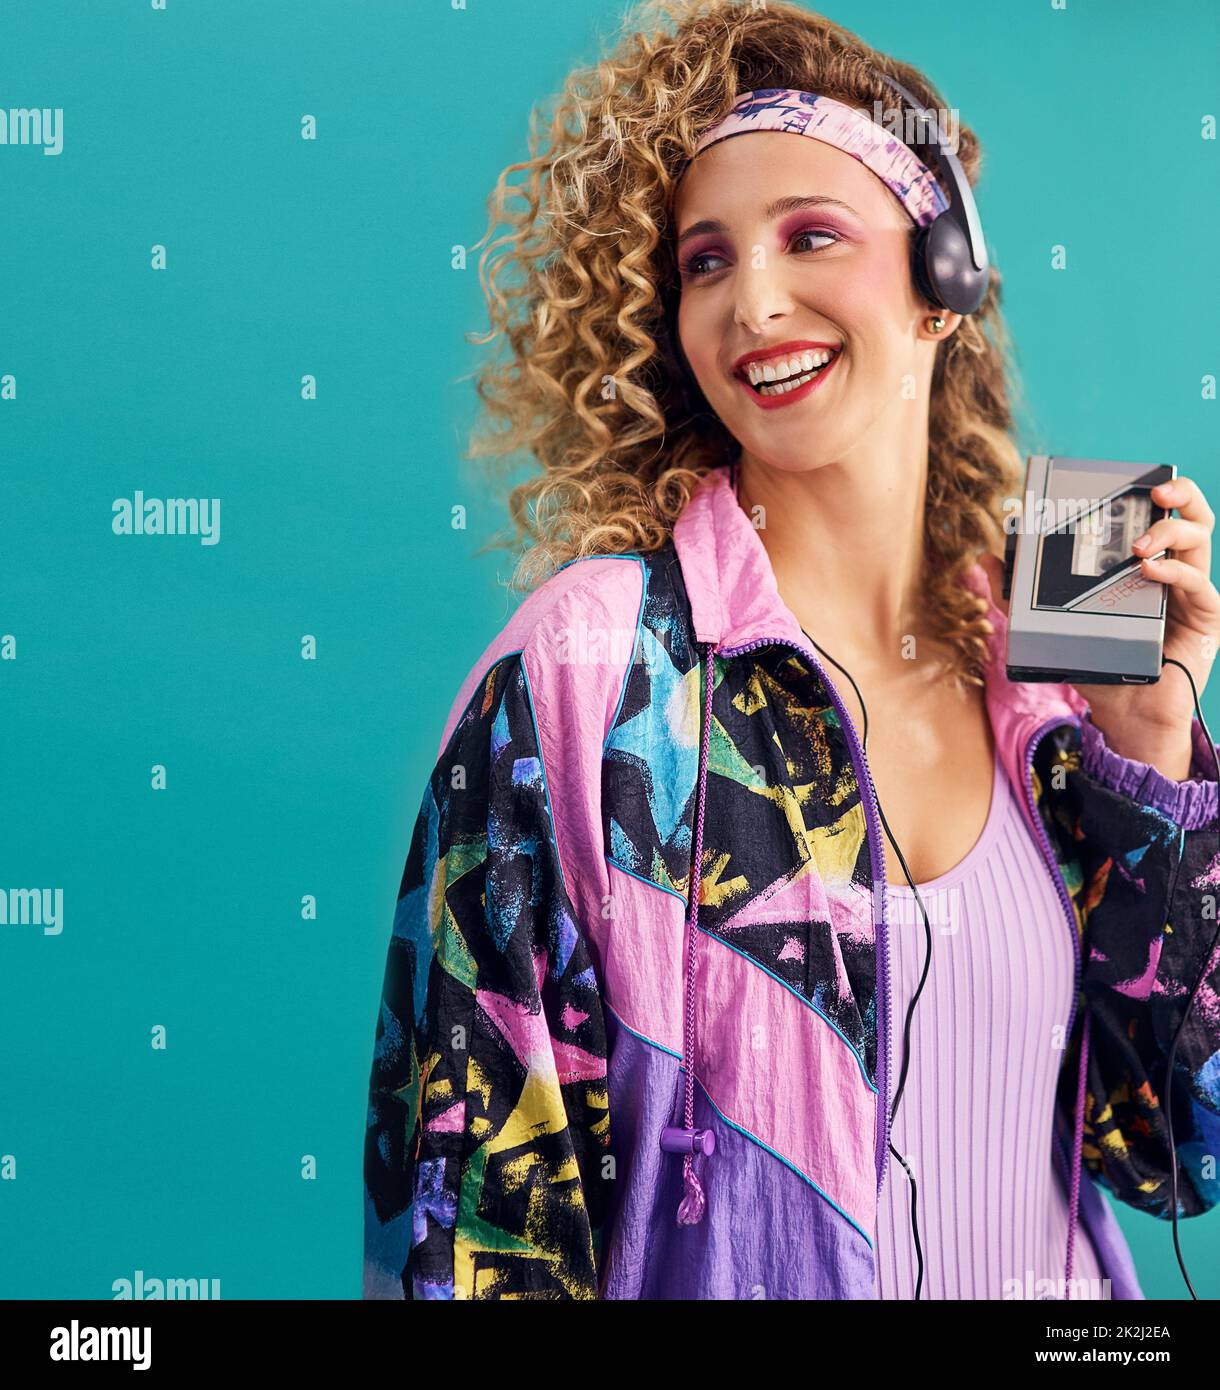 Nothing makes me feel as good as 80s music. Studio shot of a young woman holding a cassette player while dressed in 80s clothing. Stock Photo